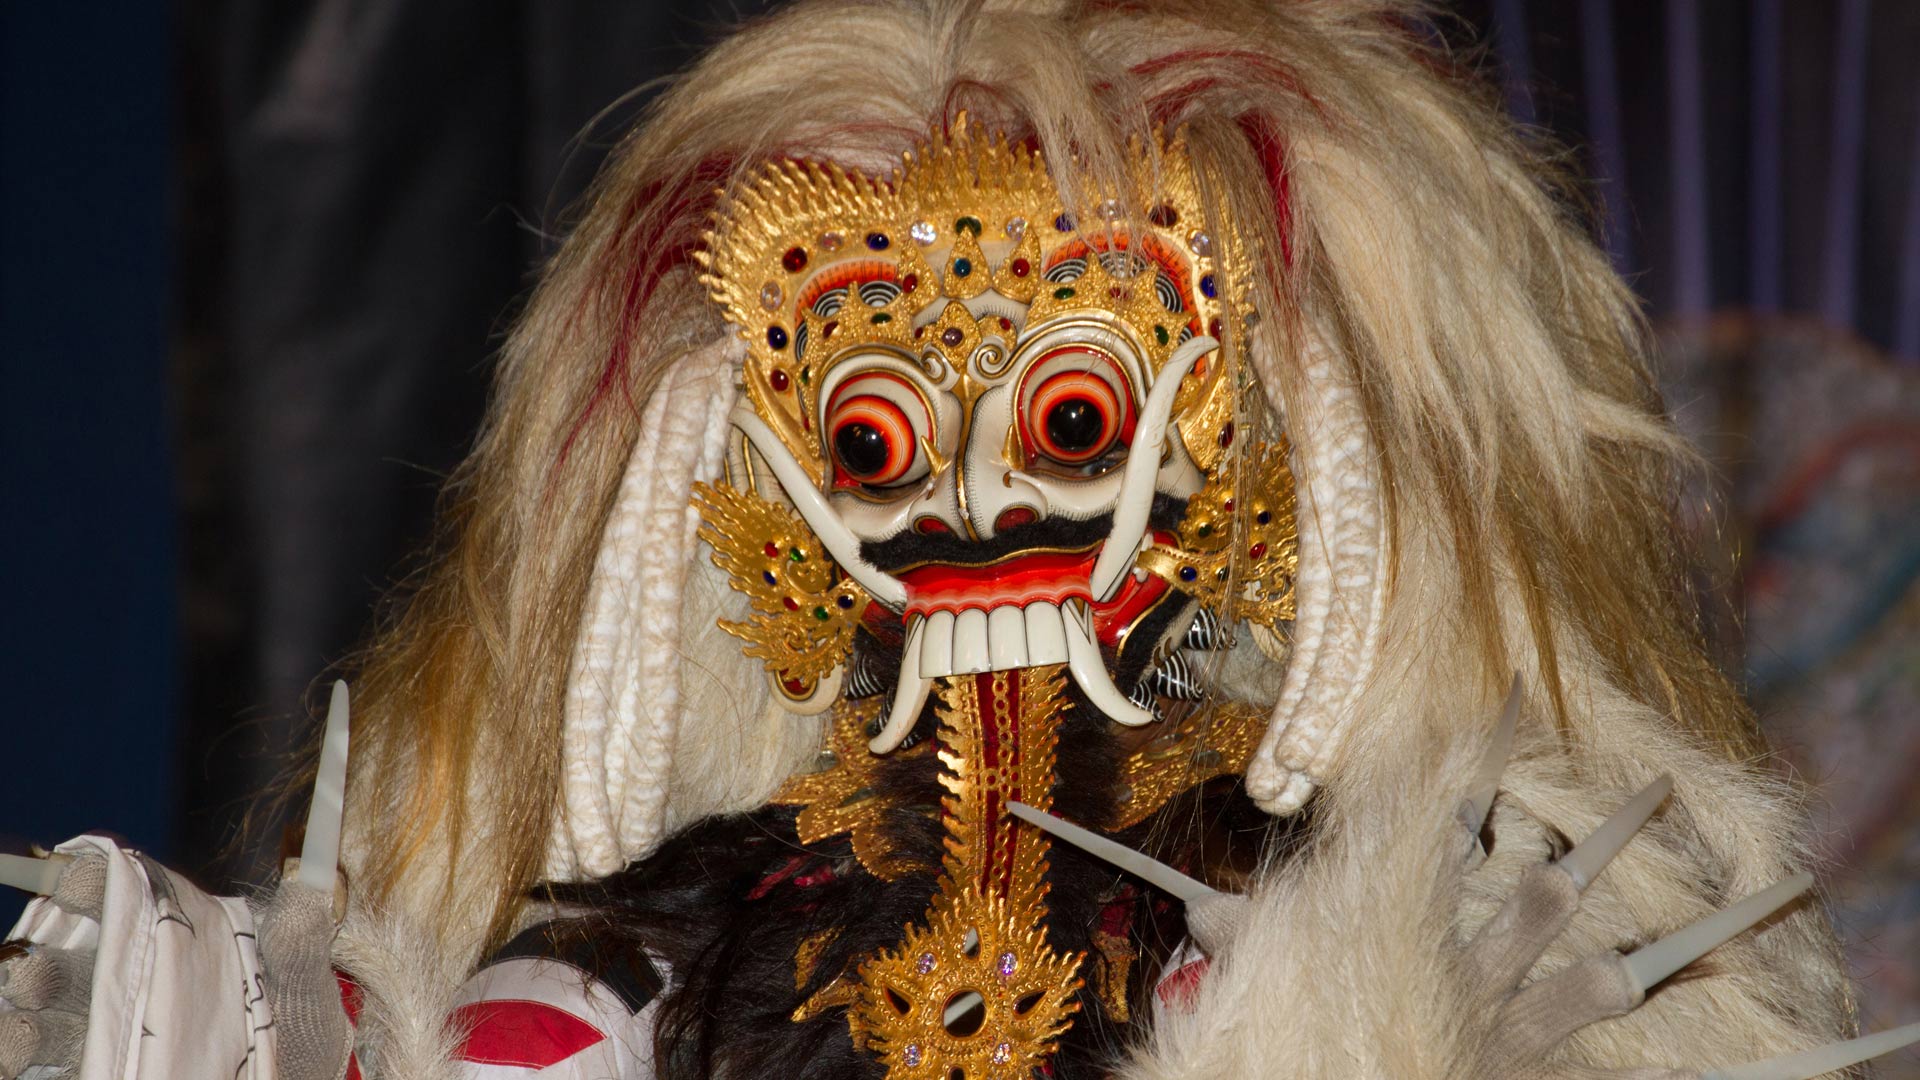 Rangda, a mythological creature in a Barong dance performance by the Raja Peni troupe in the evening, Ubud, Bali, Indonesia